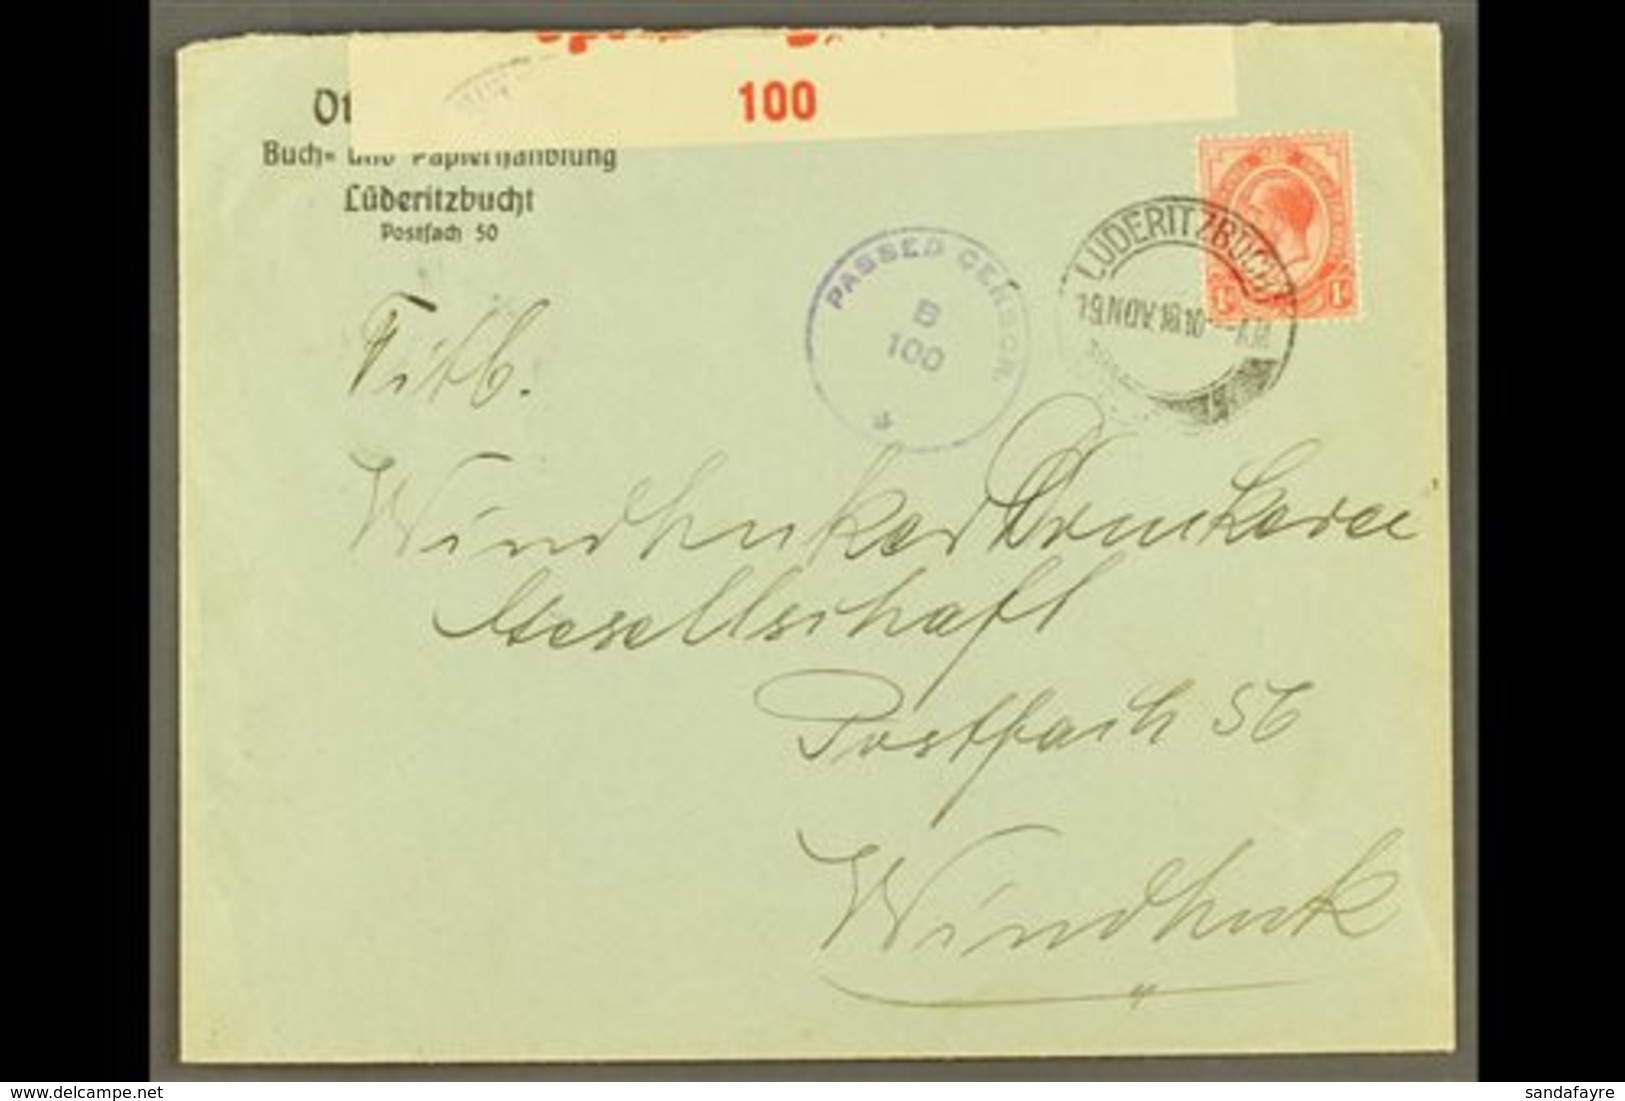 1918 (19 Nov) Printed Cover To Windhuk Bearing 1d Union Stamp Tied By "LUDERITZBUCHT" Cds Cancellation, Putzel Type B9 O - Afrique Du Sud-Ouest (1923-1990)